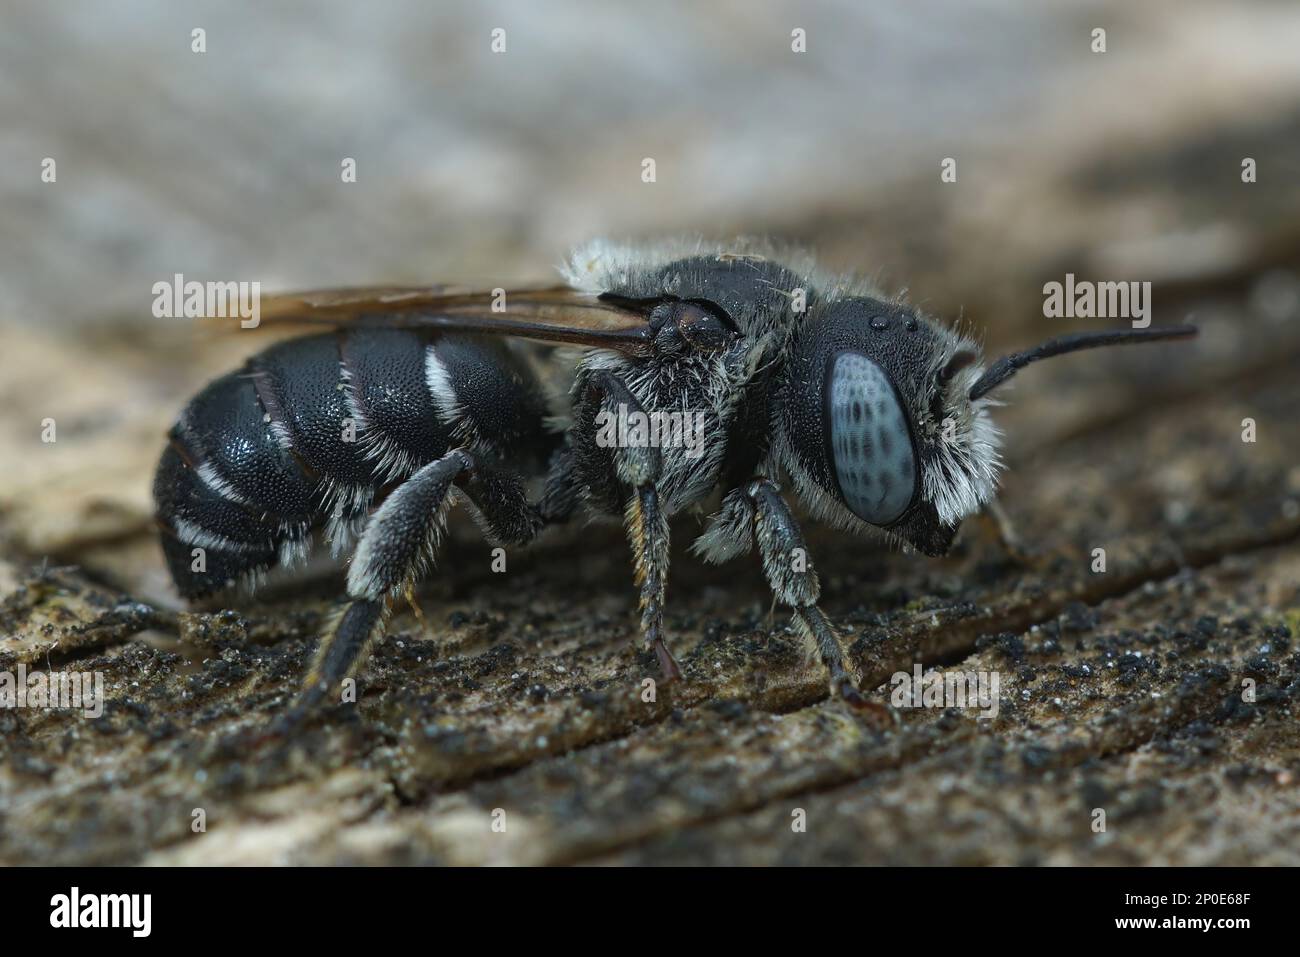 Closeup of a female of the blue-eyed, snail-housing, Spined Mason Bee or Osmia spinulosa sitting on wood Stock Photo